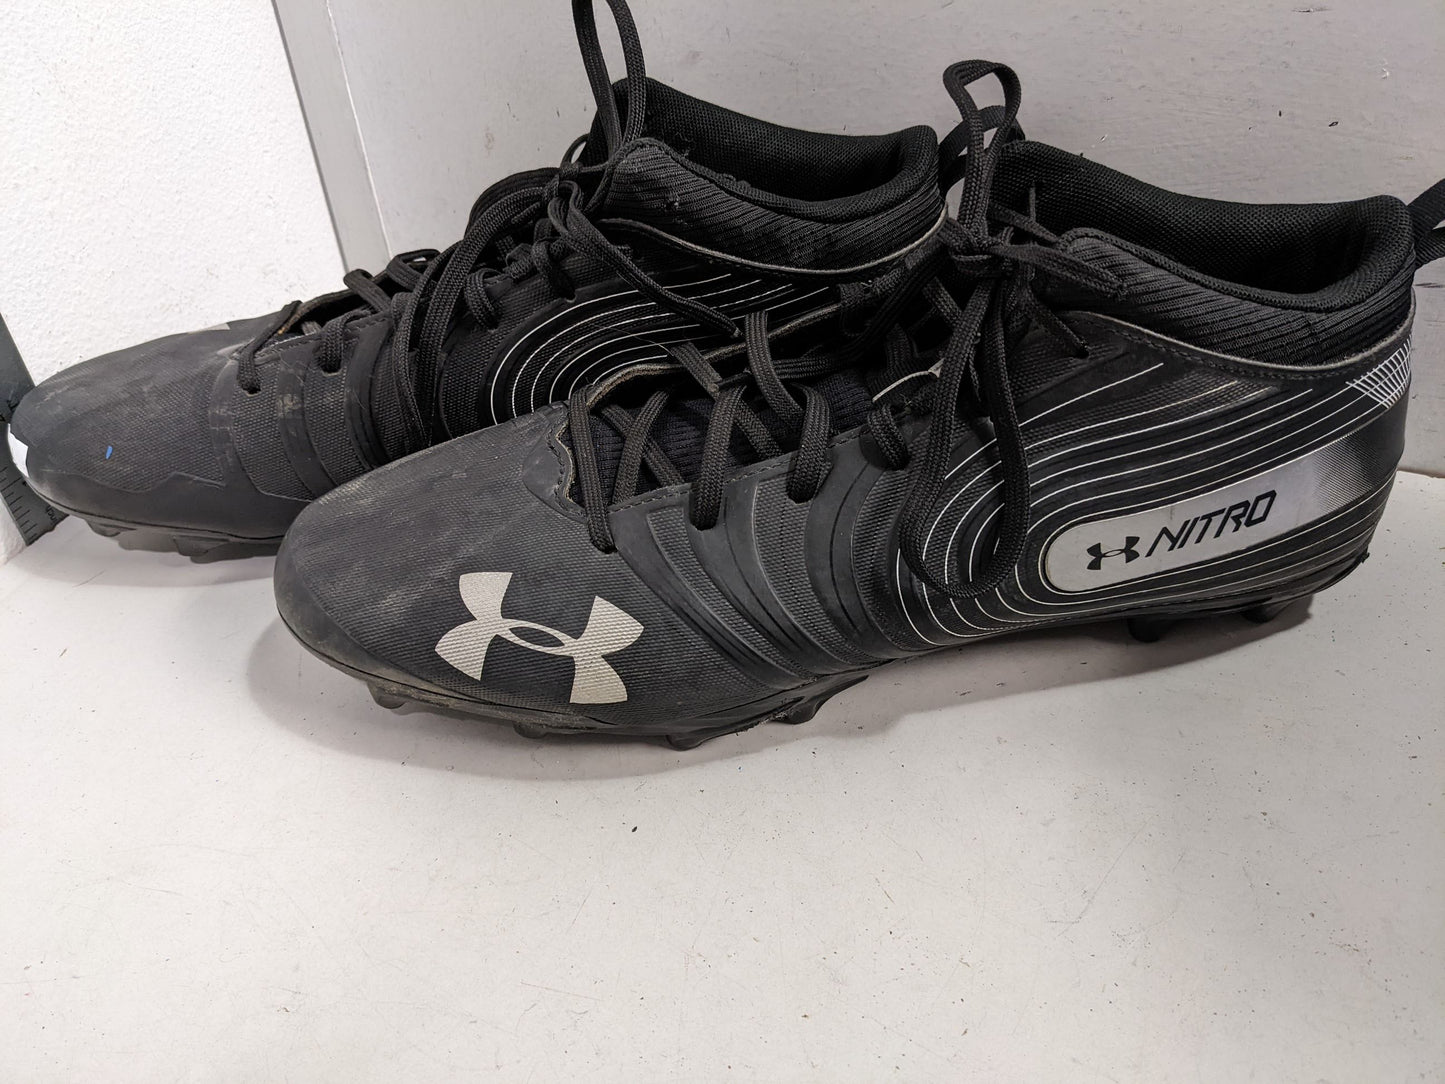 Under Armour Nitro Cleats Size 14 Black Used